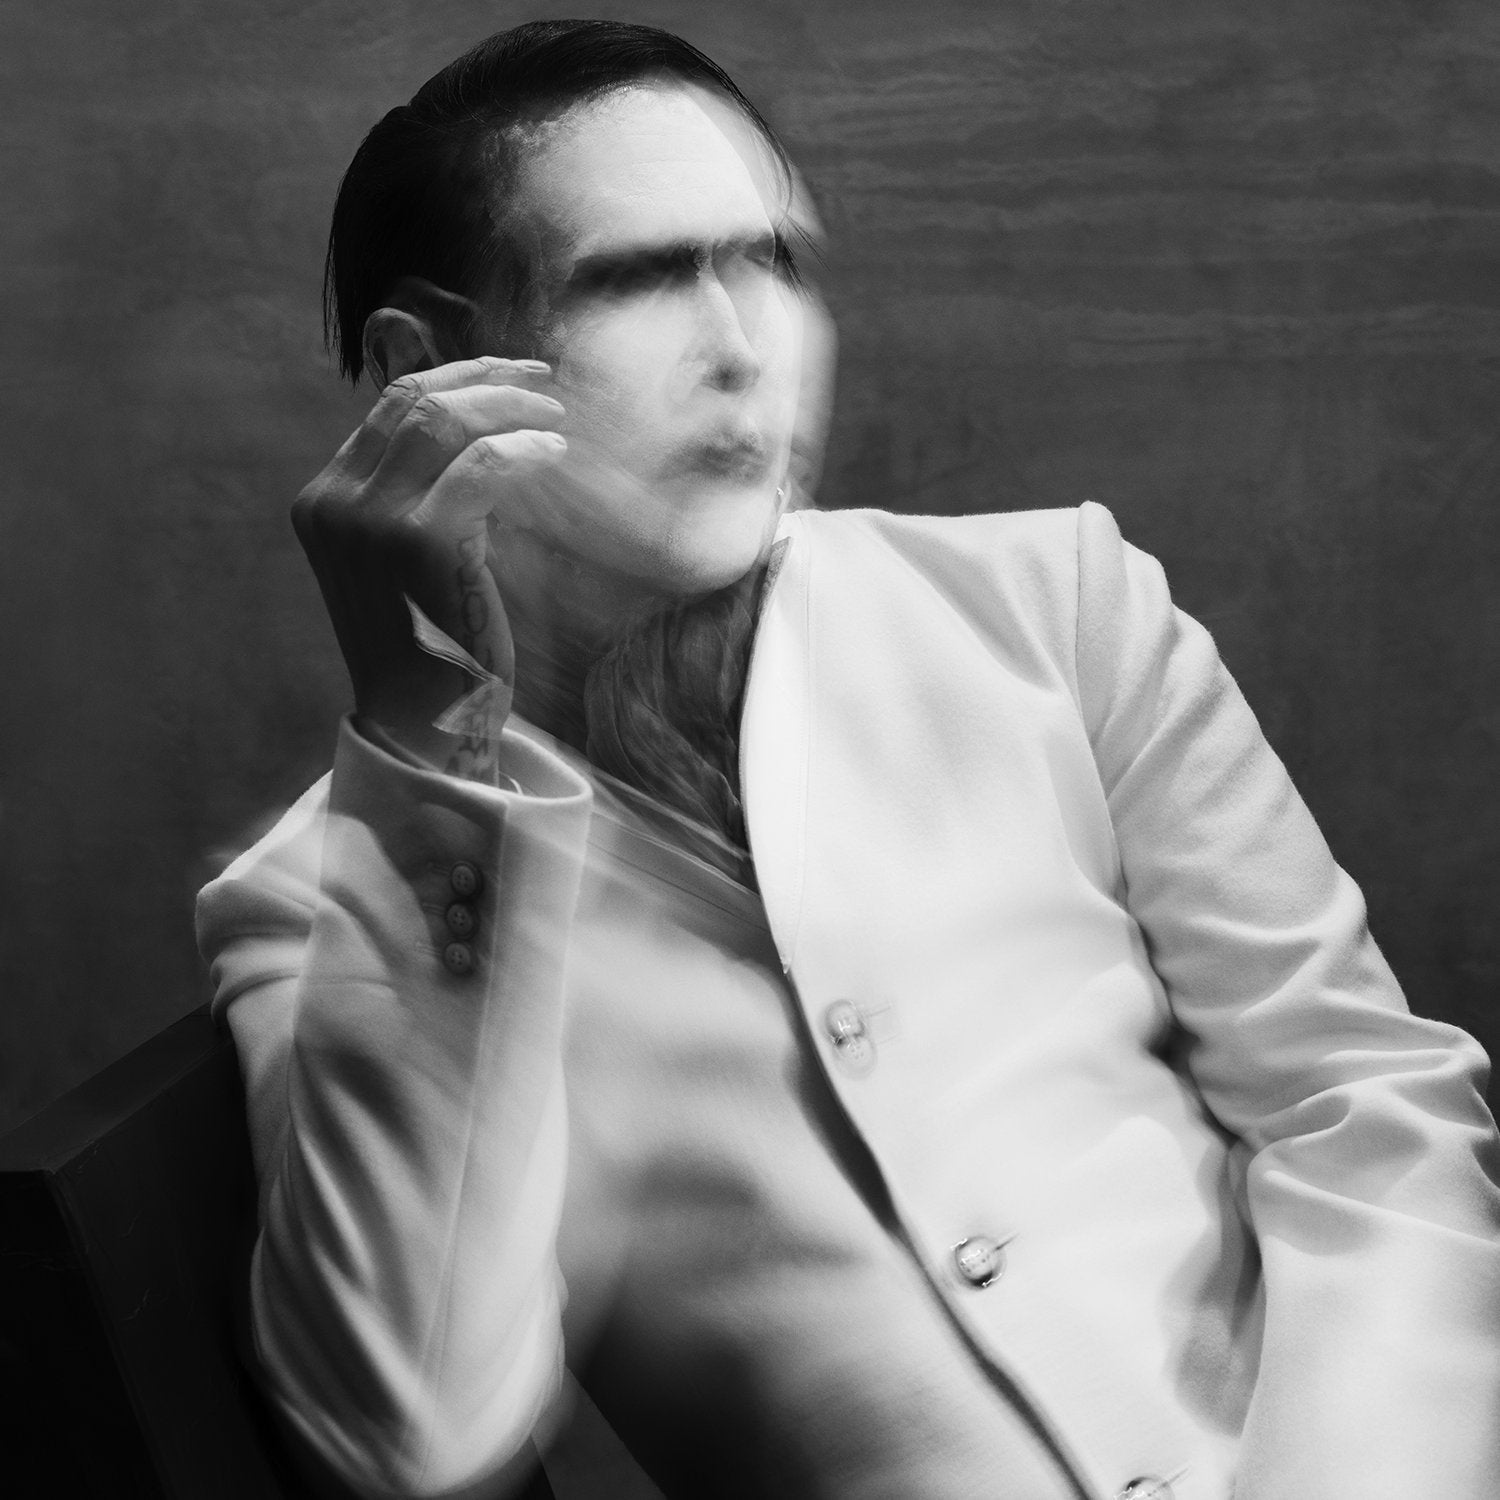 CD Marilyn Manson - The pale emperor